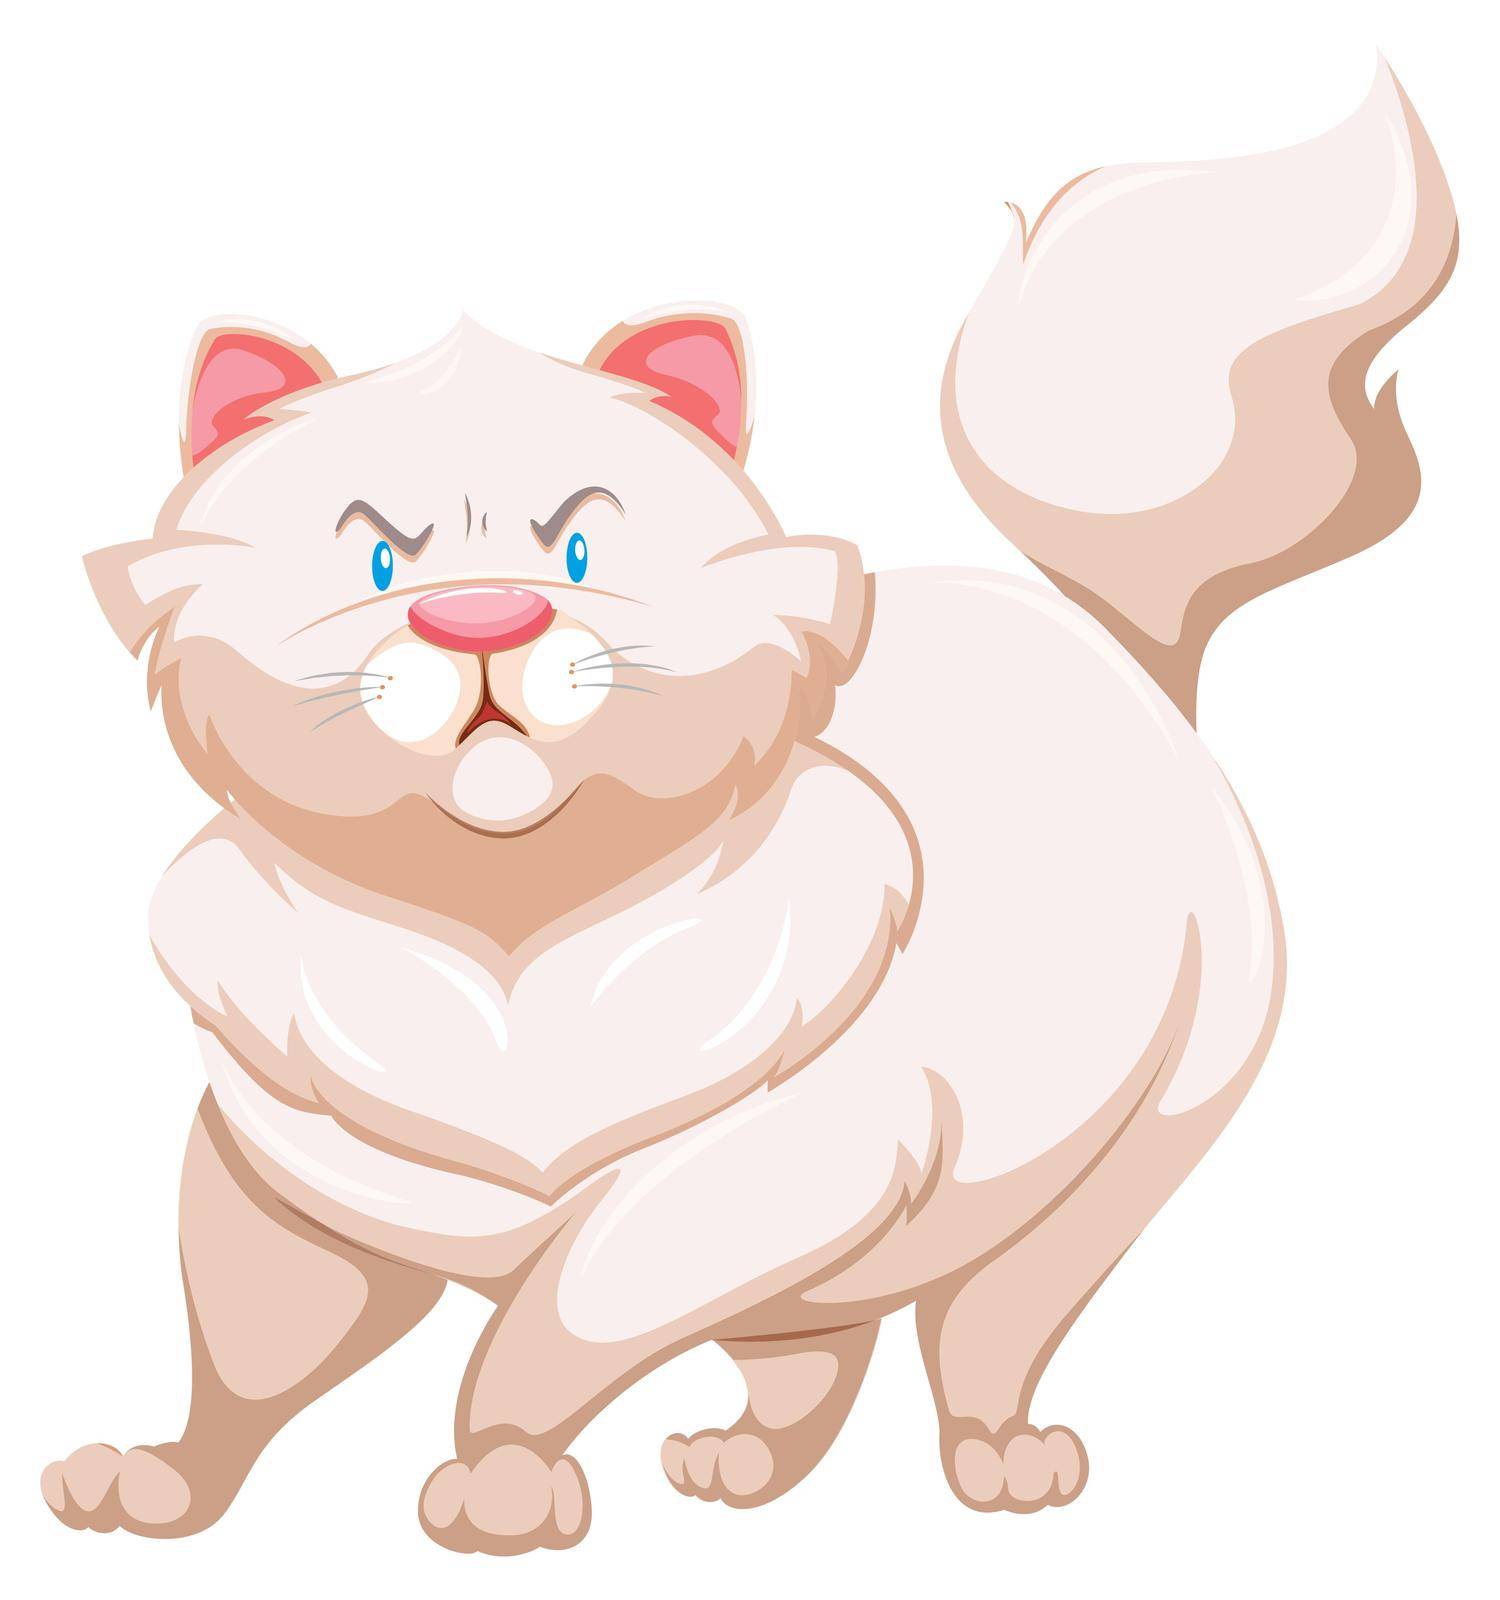 Angry fat cat on a white background